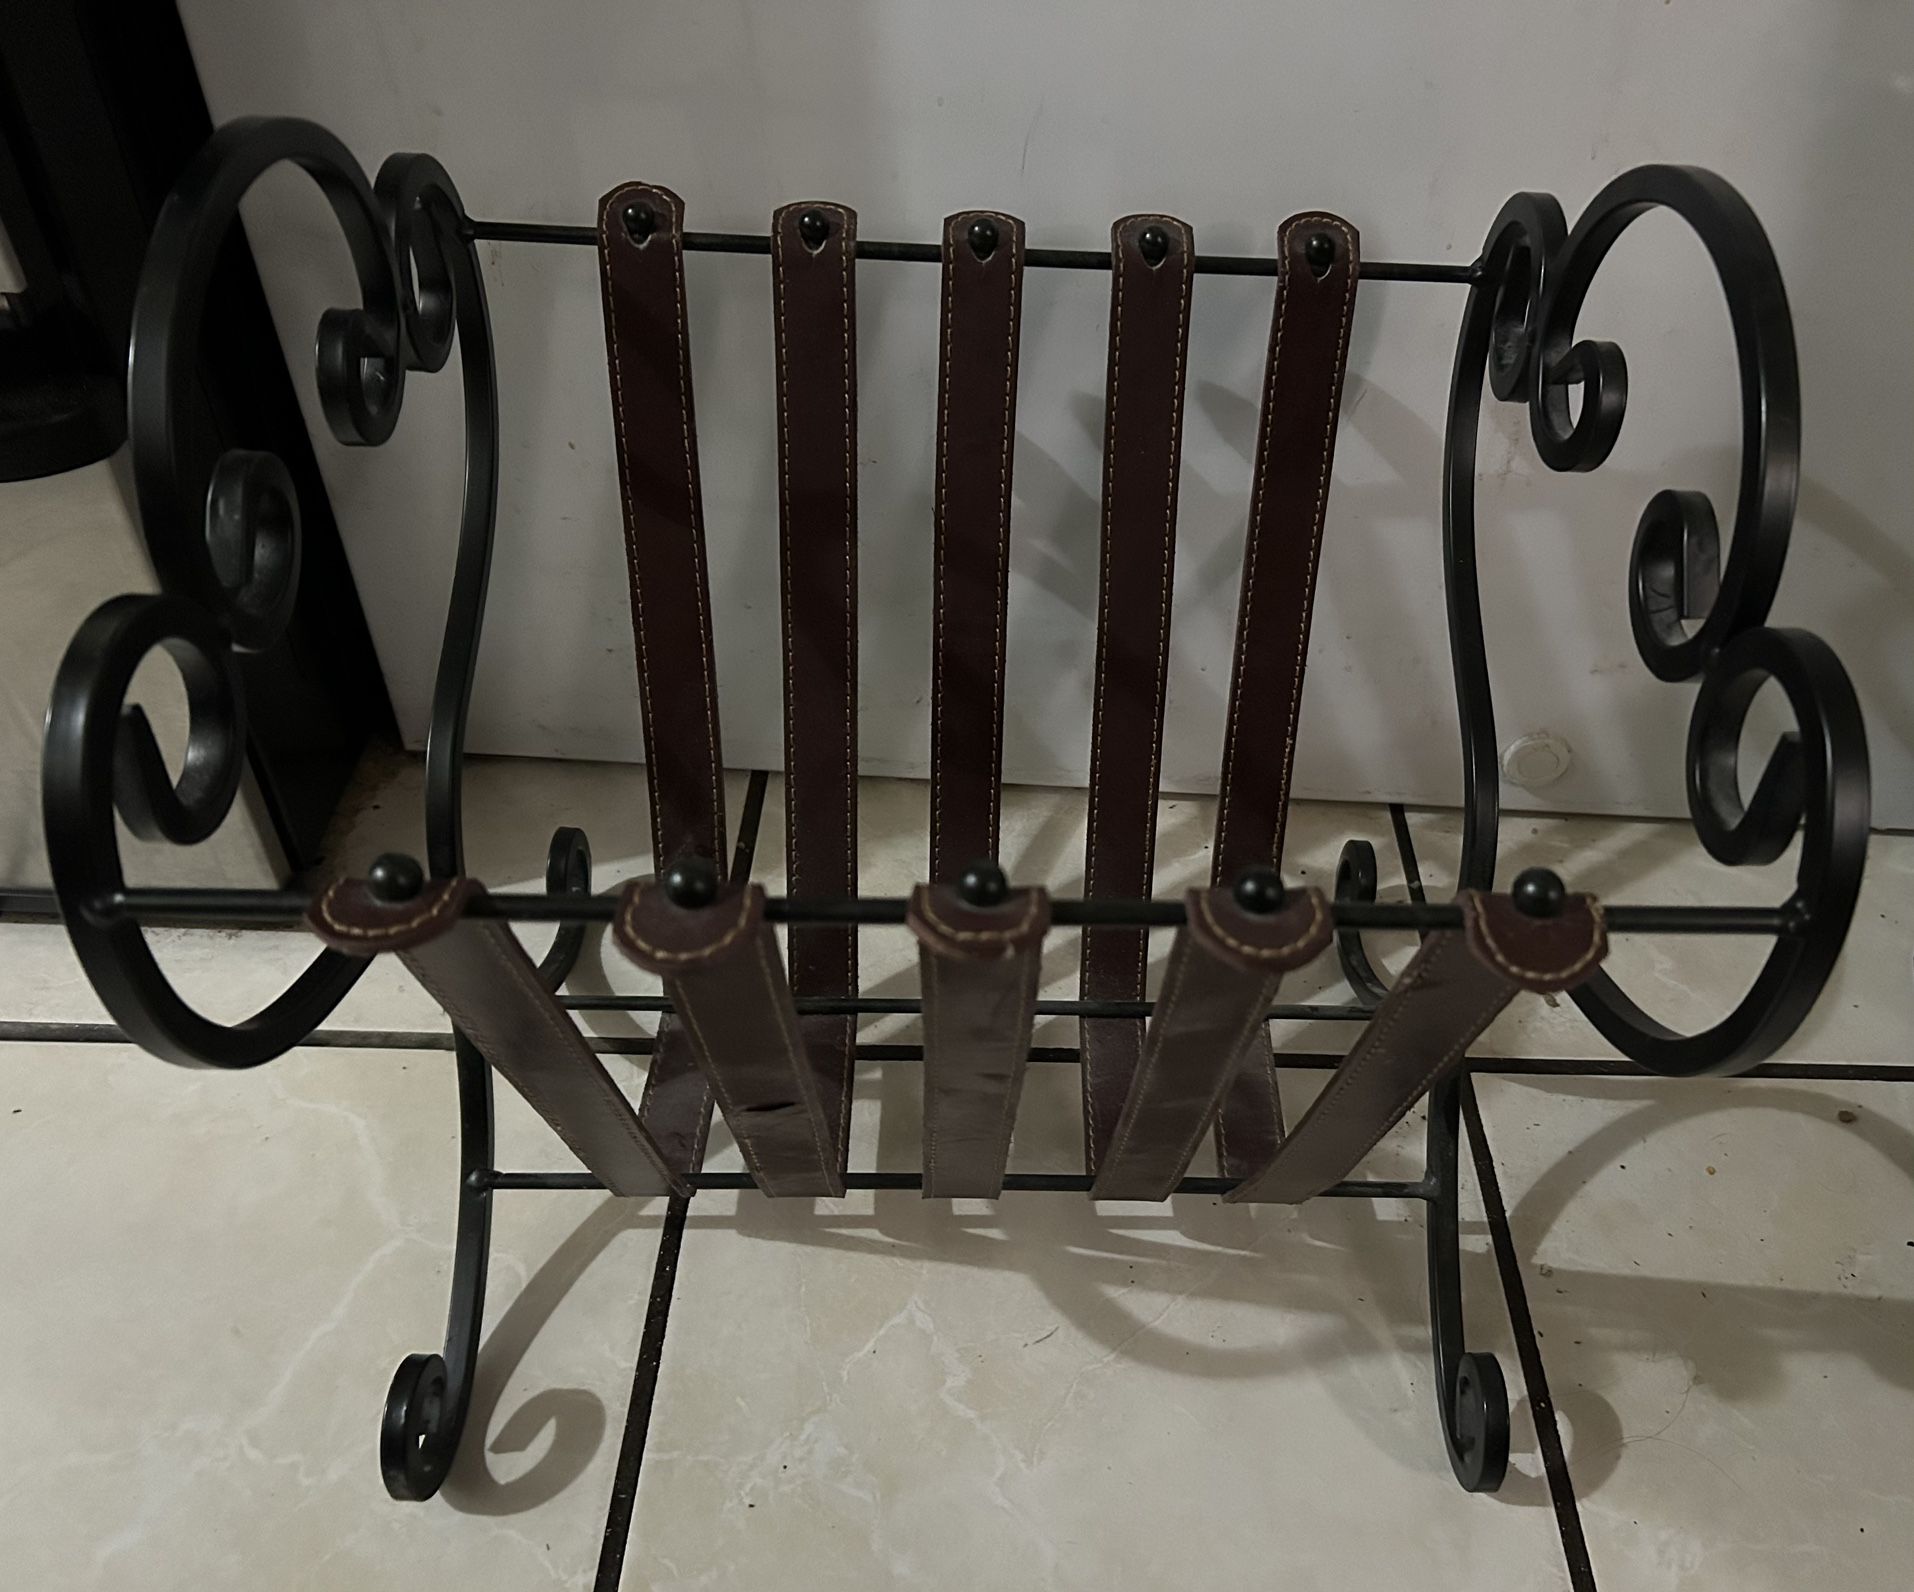 Contemporary Wrought Iron and Stitched Leather Magazine Rack 